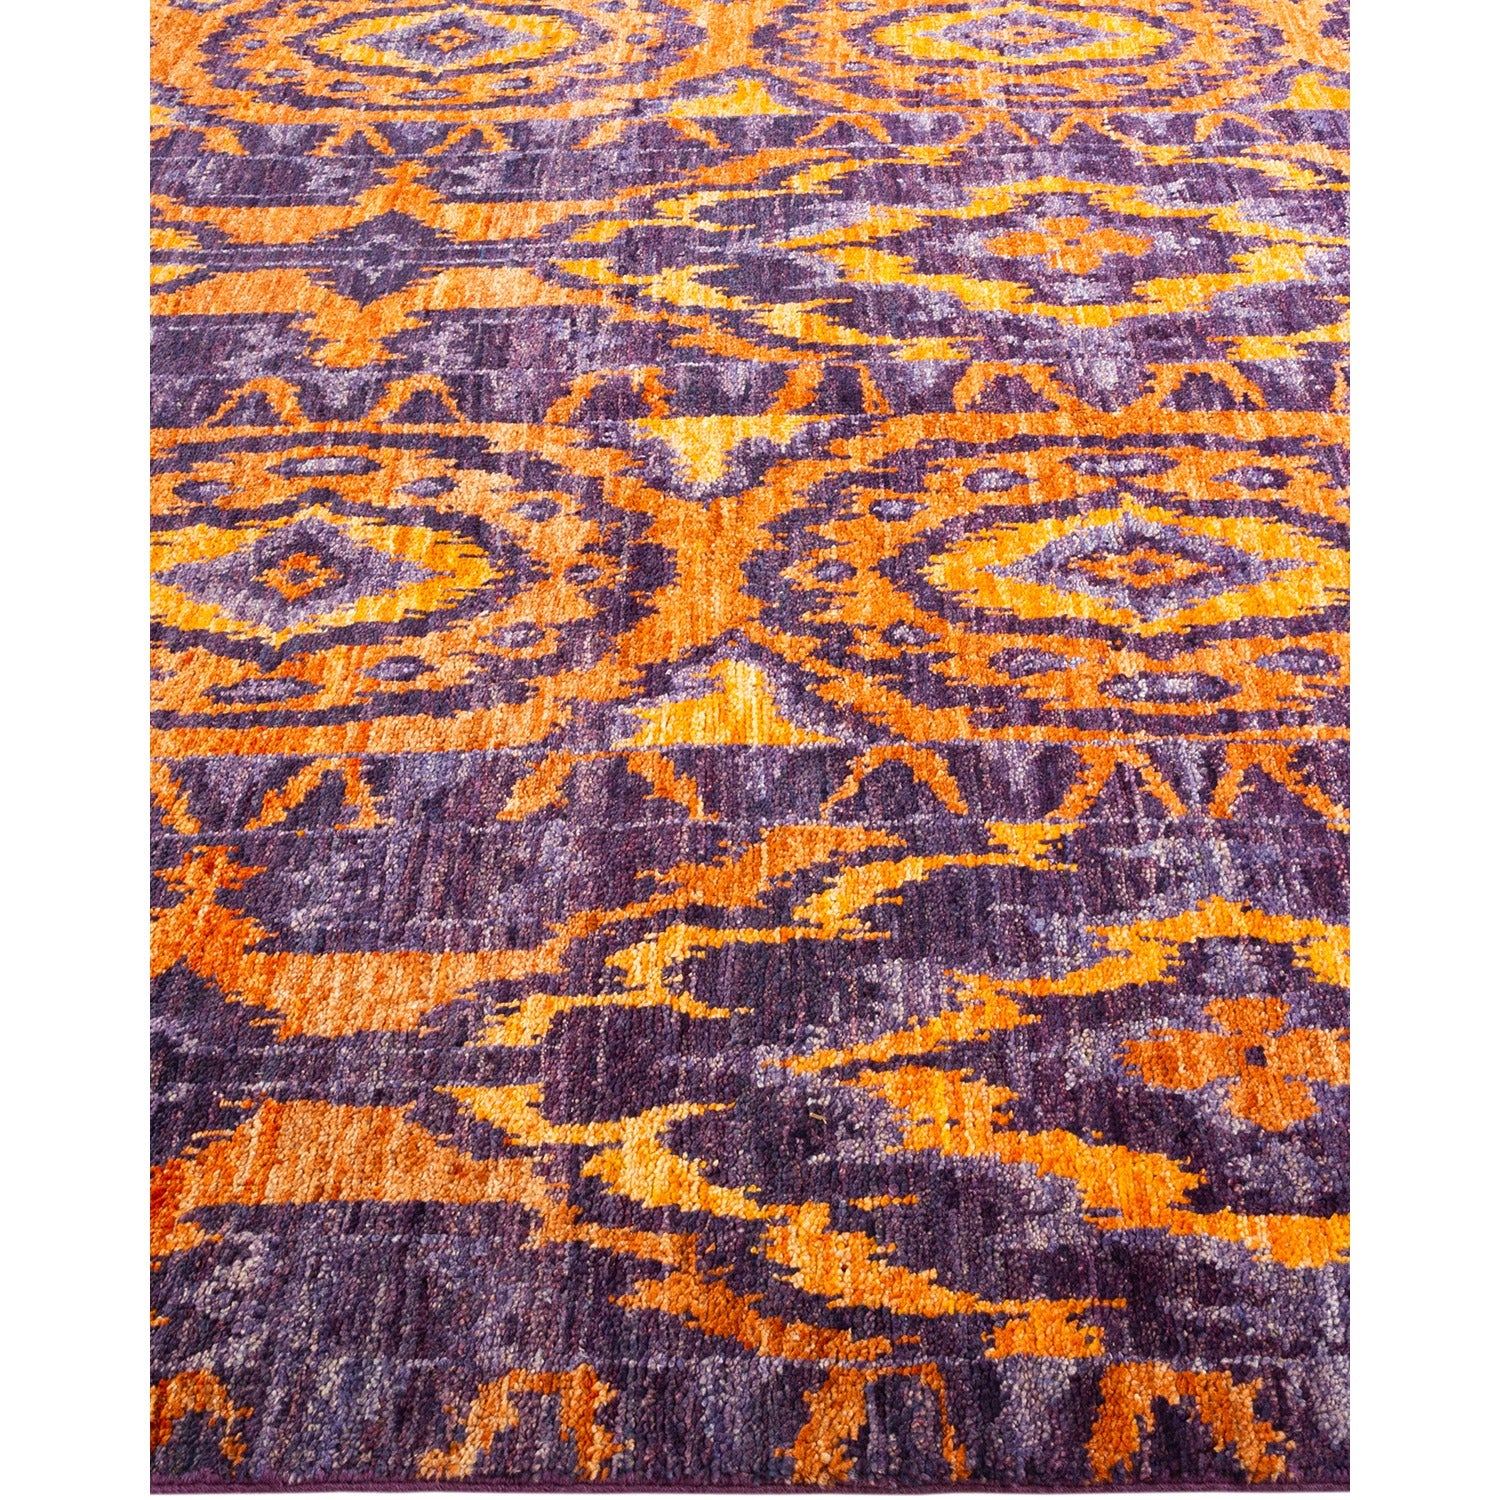 Intricate and vibrant rug with symmetrical floral and geometric motifs.